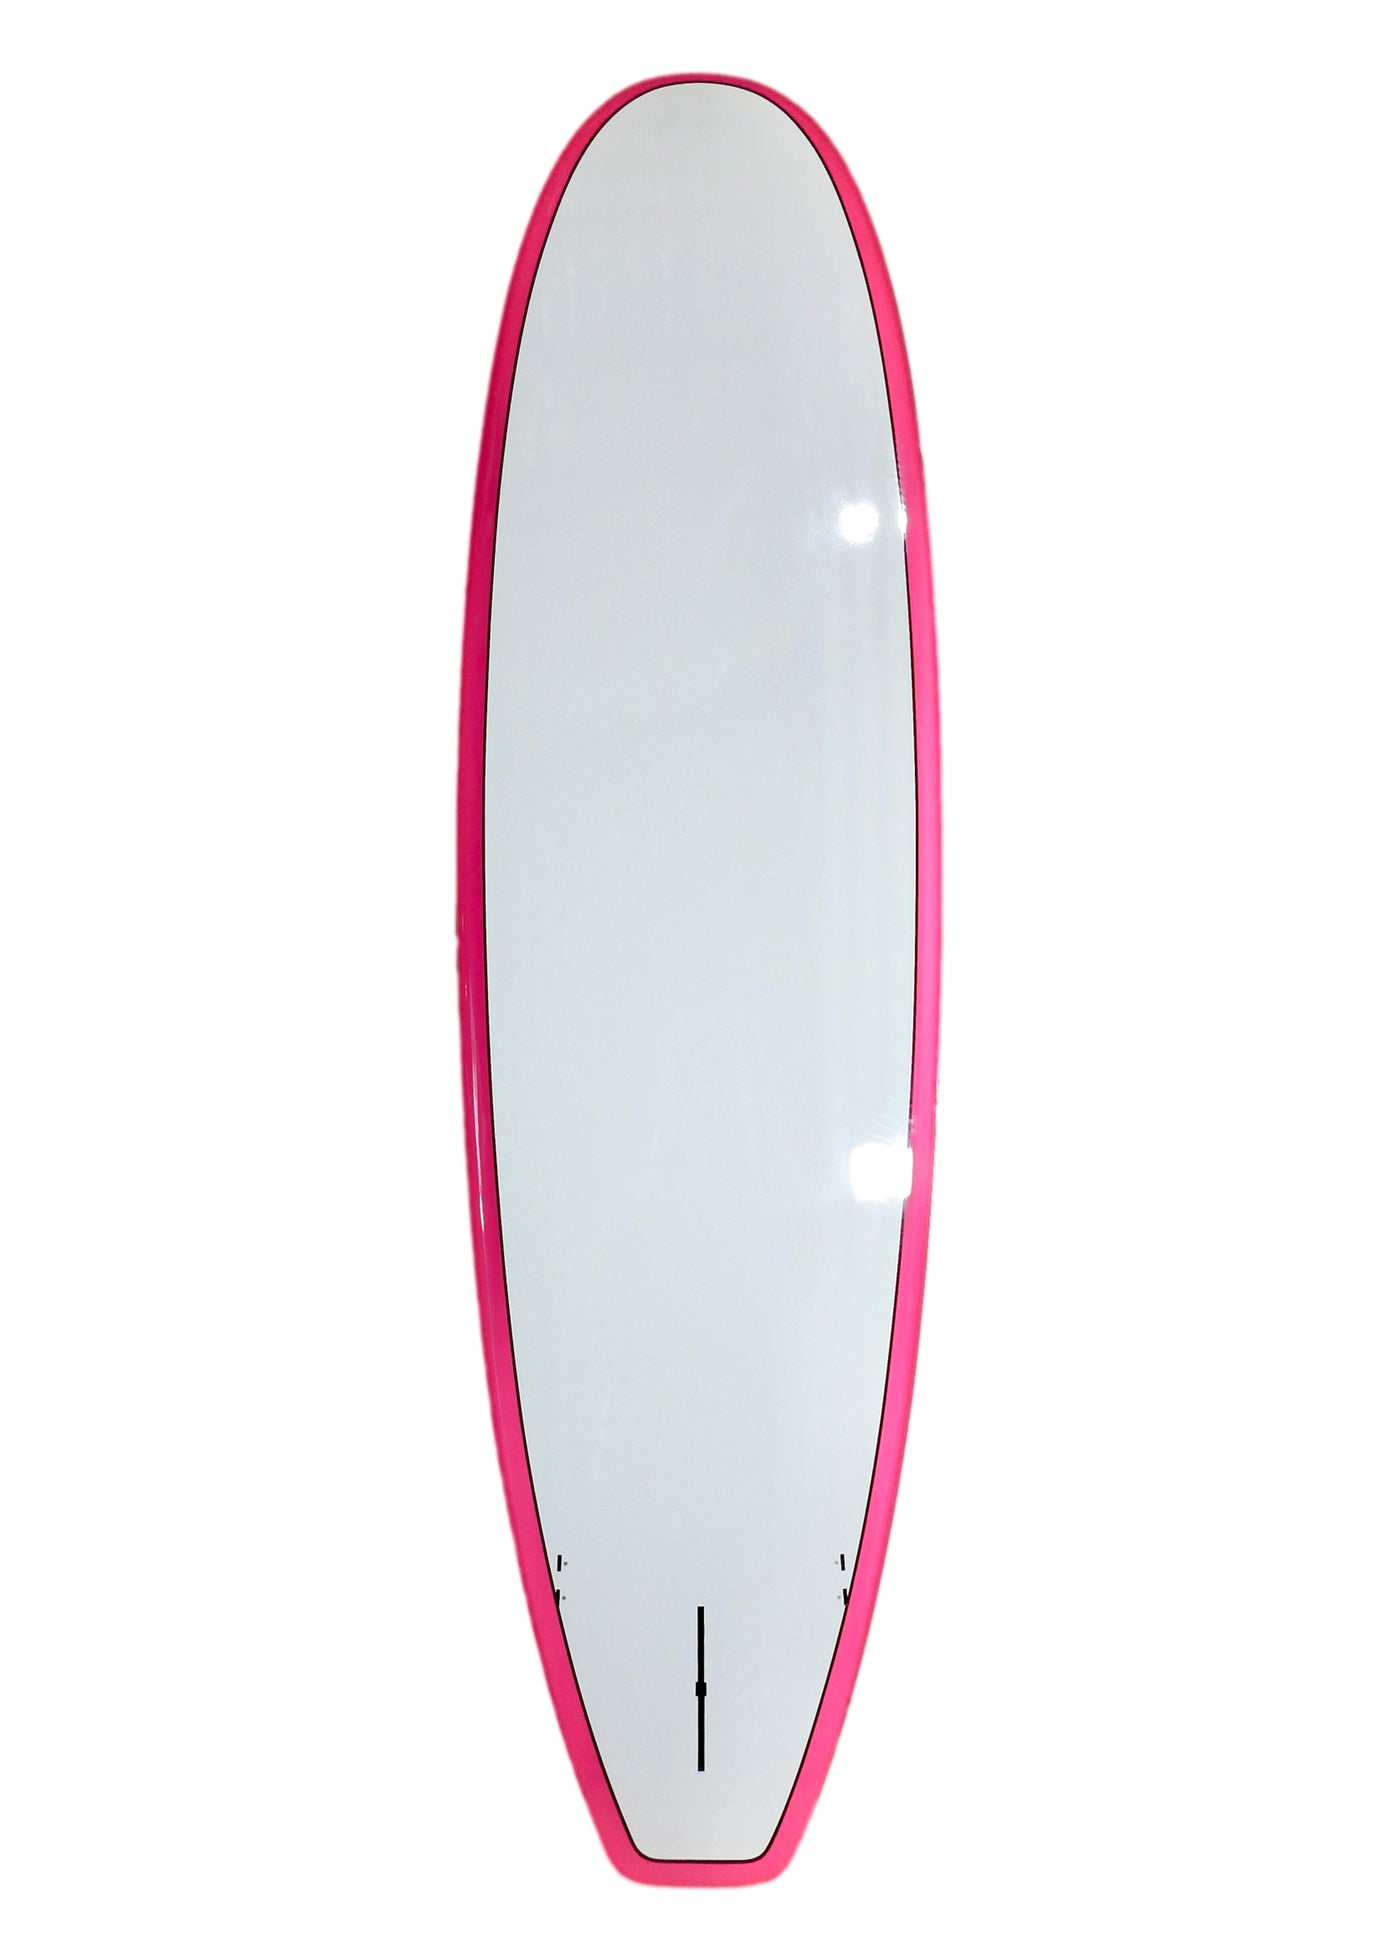 10’6”x 32” Pink Turtle And White Thermo Mould Family Alleydesigns SUP - Alleydesigns  Pty Ltd                                             ABN: 44165571264